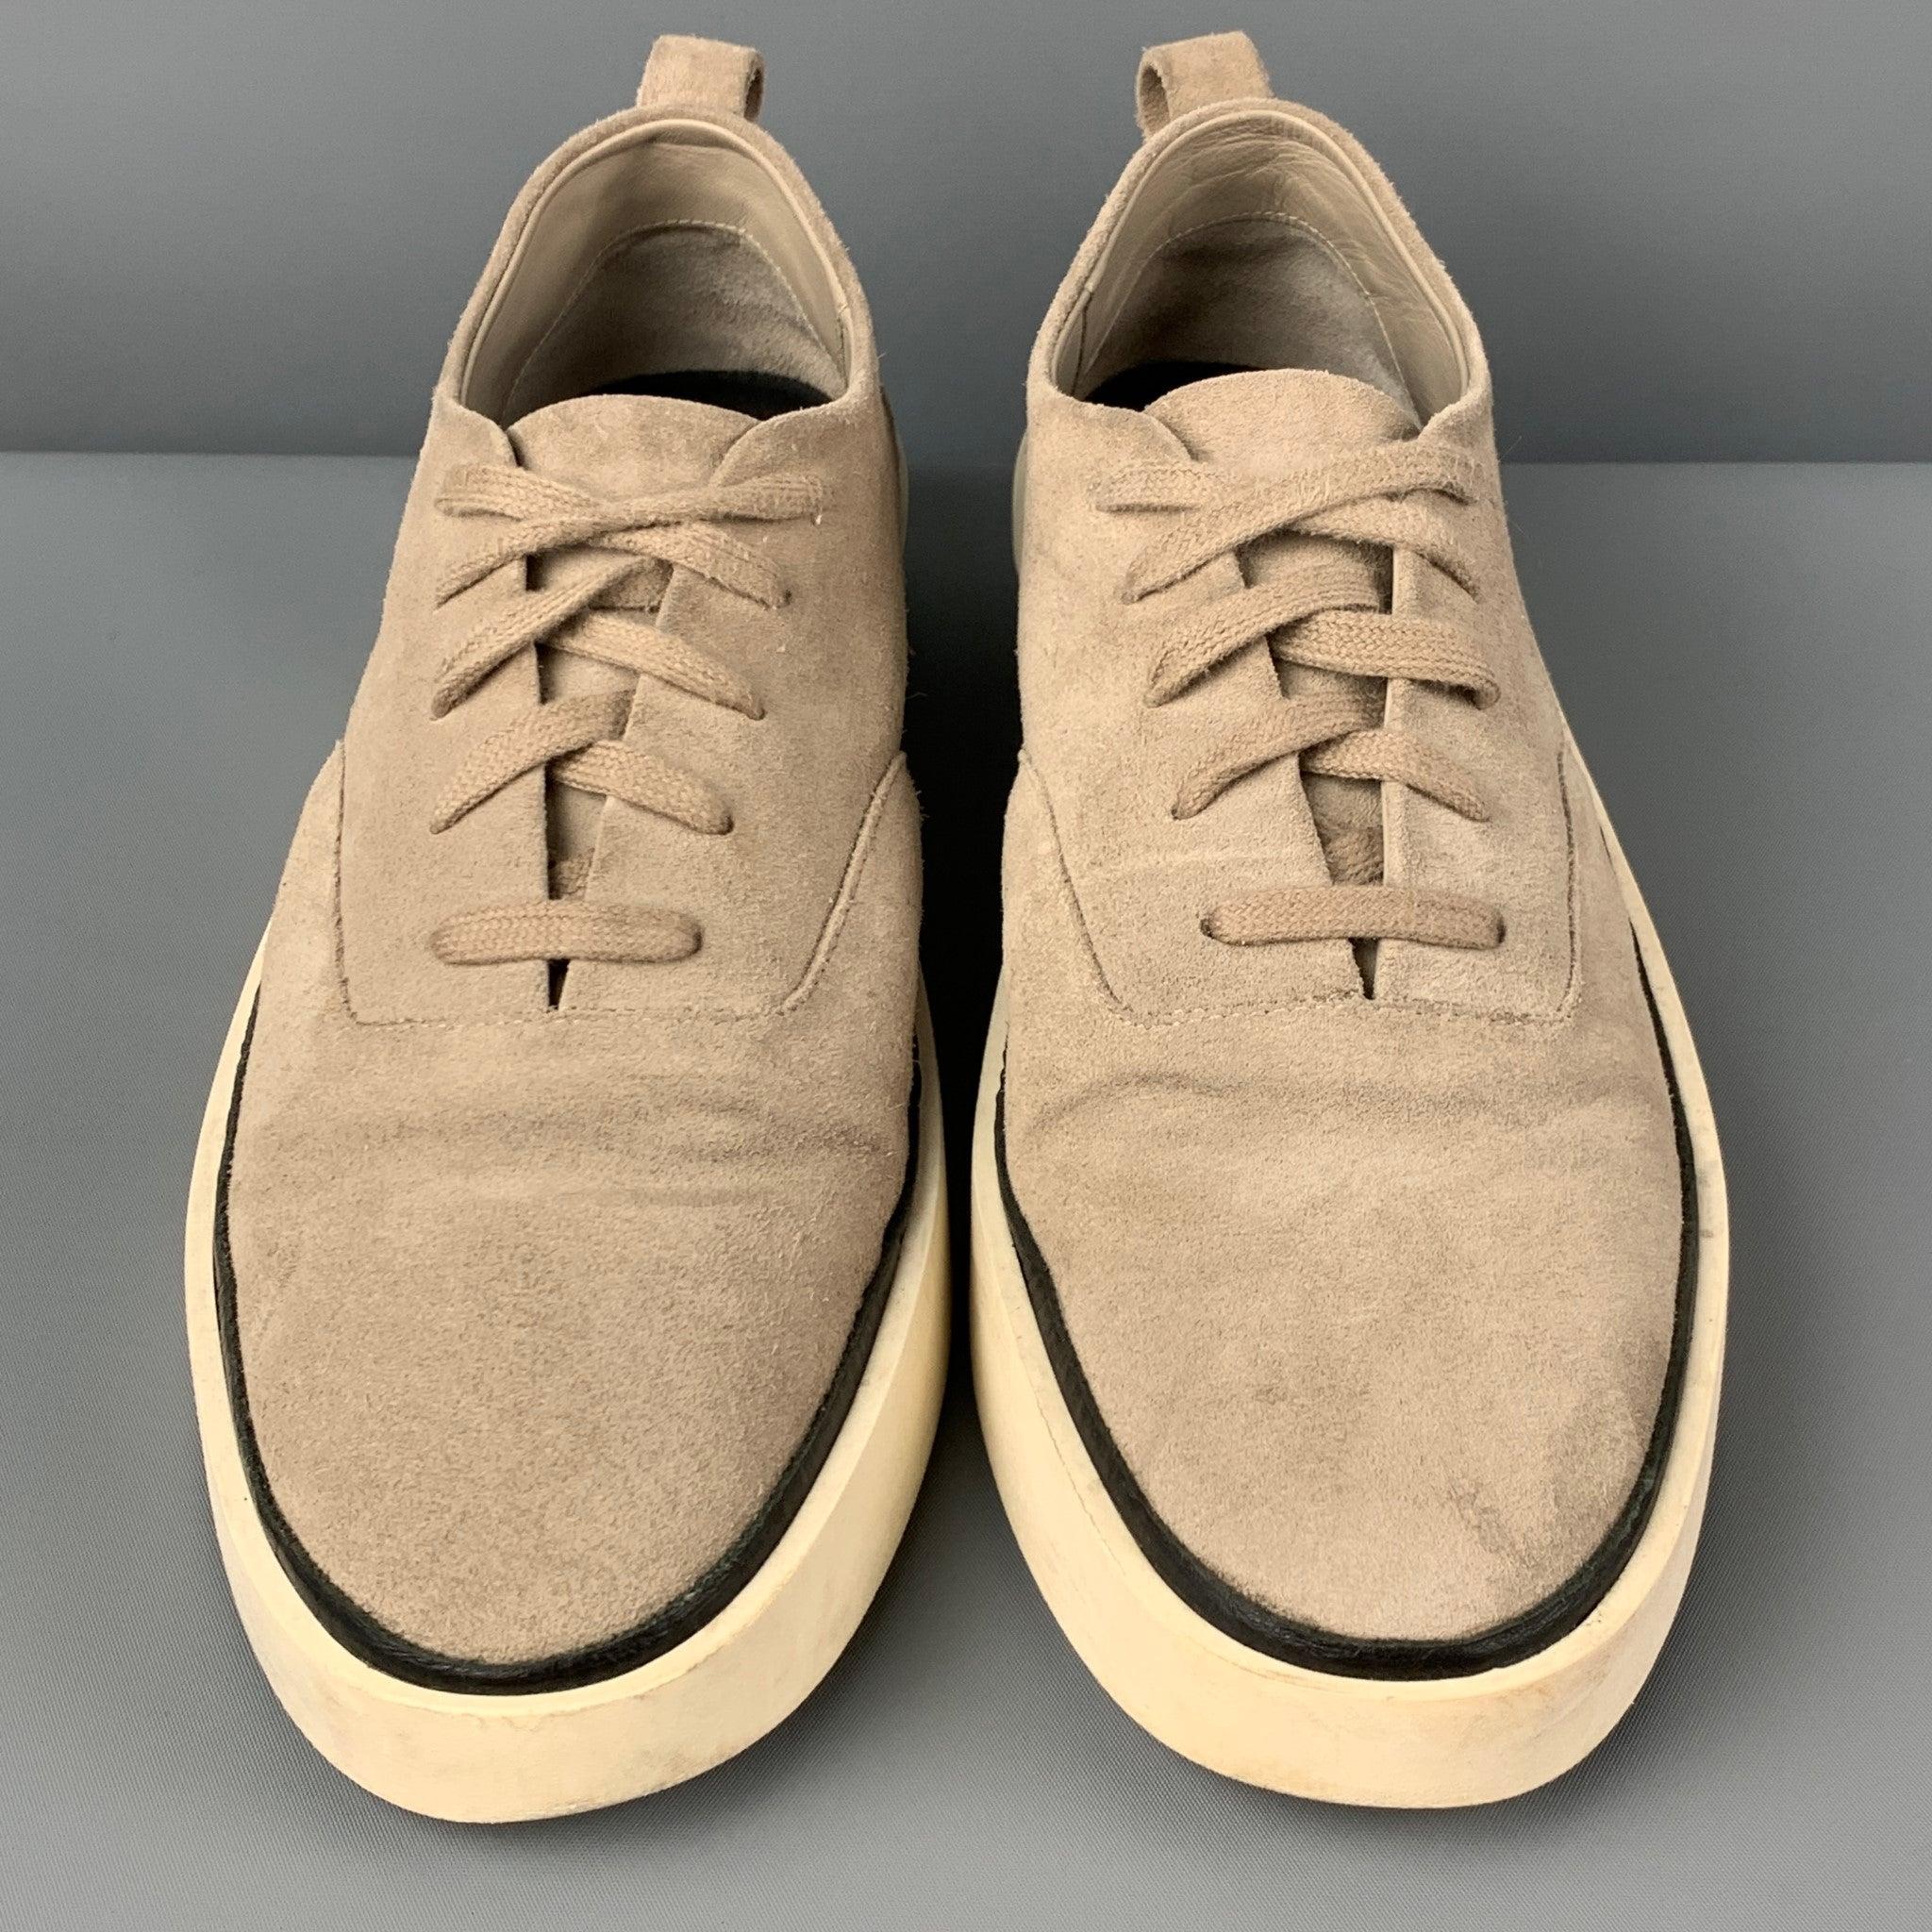 Men's FEAR OF GOD Size 11 Light Gray Textured Leather Lace Up Sneakers For Sale